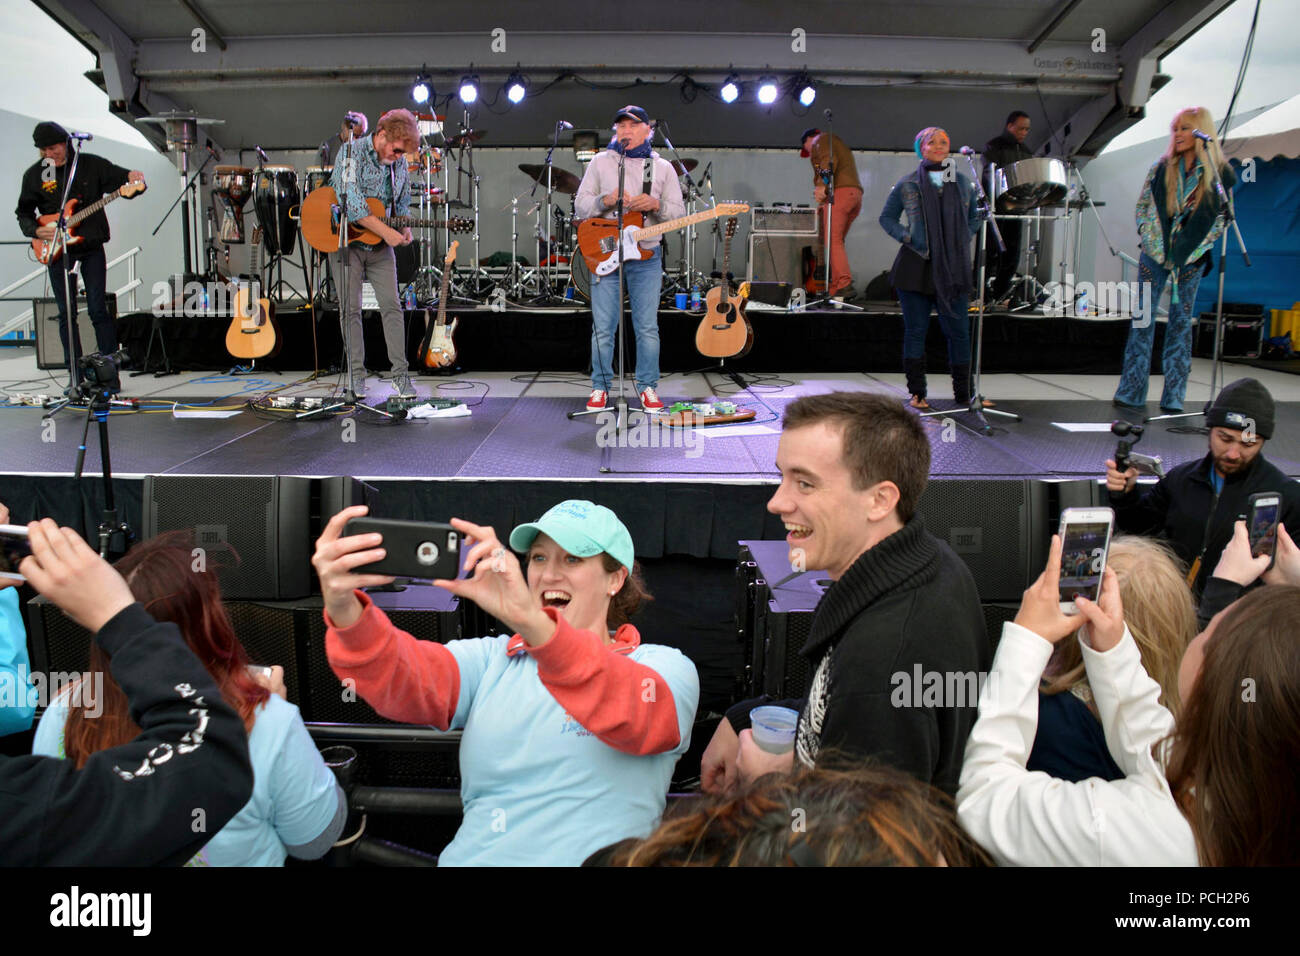 YOKOSUKA, Japan (October 30, 2016) – A person in the crowd takes a selfie with recording Artist Jimmy Buffett and the Coral Reefer Band during a Navy Entertainment Sponsored concert for Sailors and family members at Fleet Activities (FLEACT) Yokosuka.  FLEACT Yokosuka provides, maintains, and operates base facilities and services in support of 7th Fleet’s forward-deployed naval forces, 83 tenant commands, and 24,000 military and civilian personnel. Stock Photo